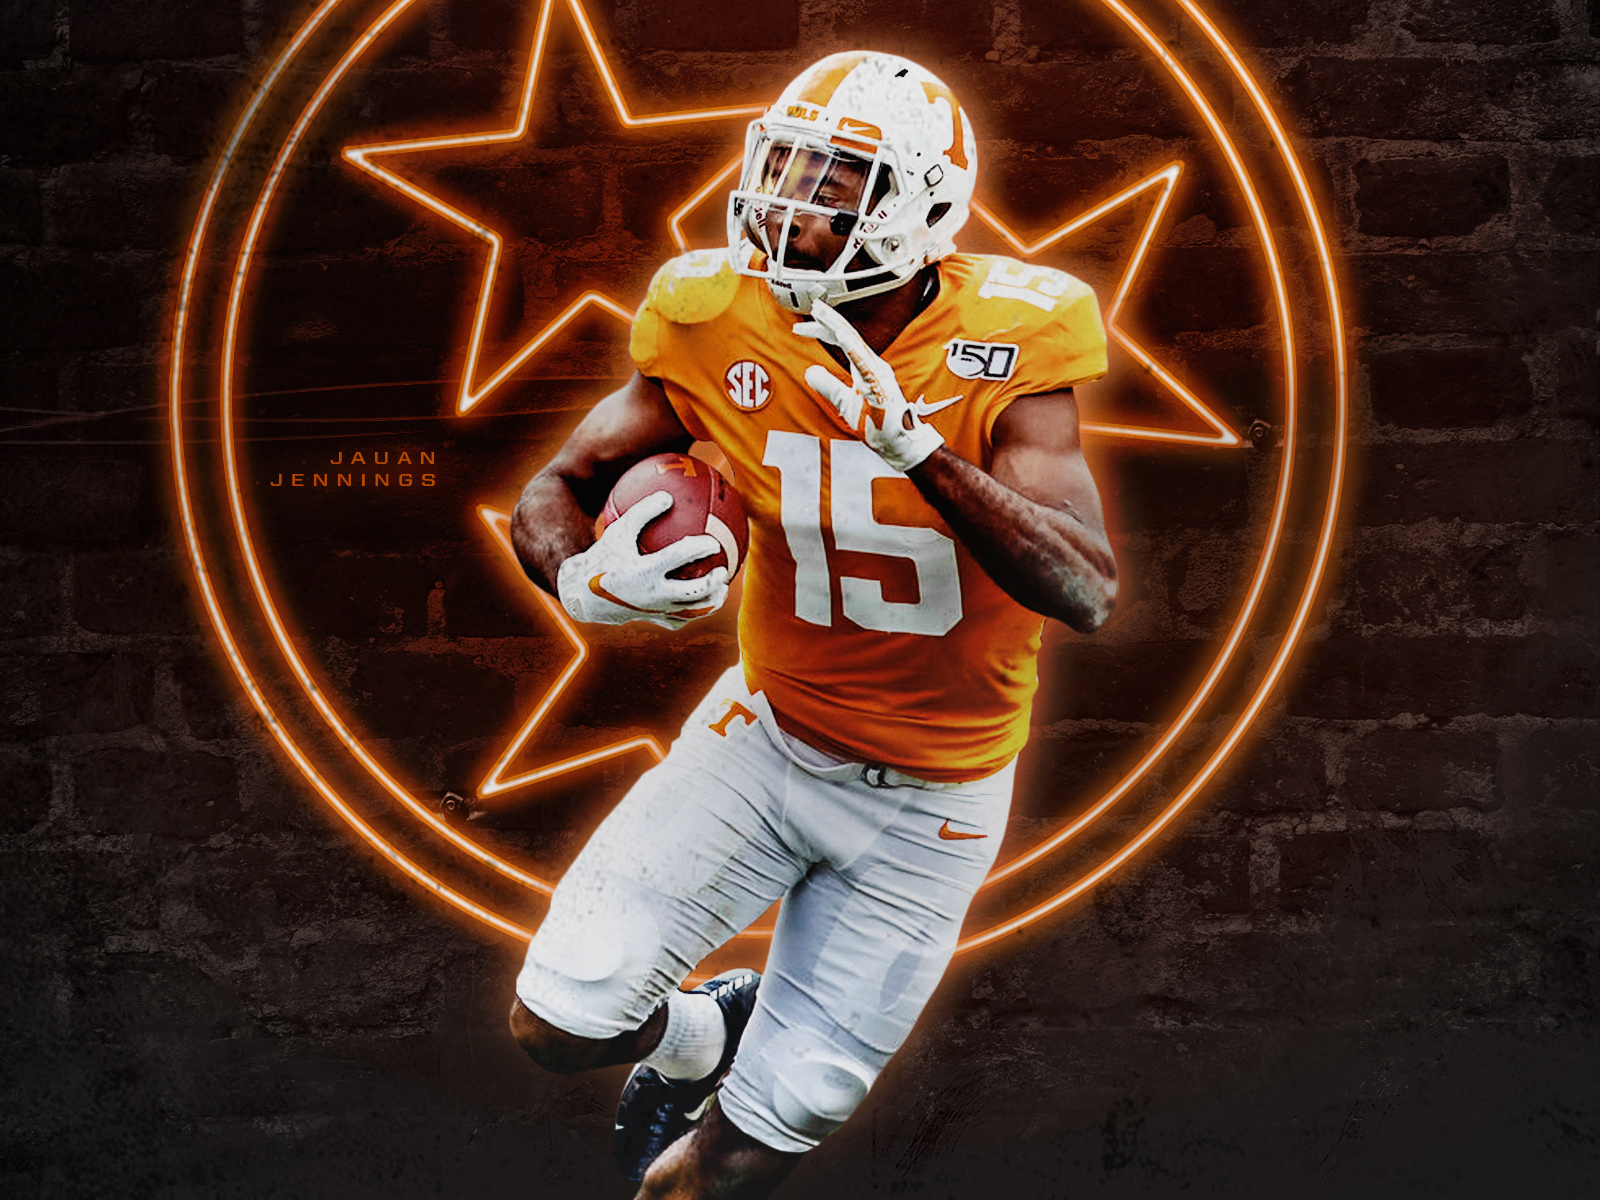 Tennessee Football on Twitter WallpaperWednesday for all your screens   httpstcocVHF7umeCH  Twitter